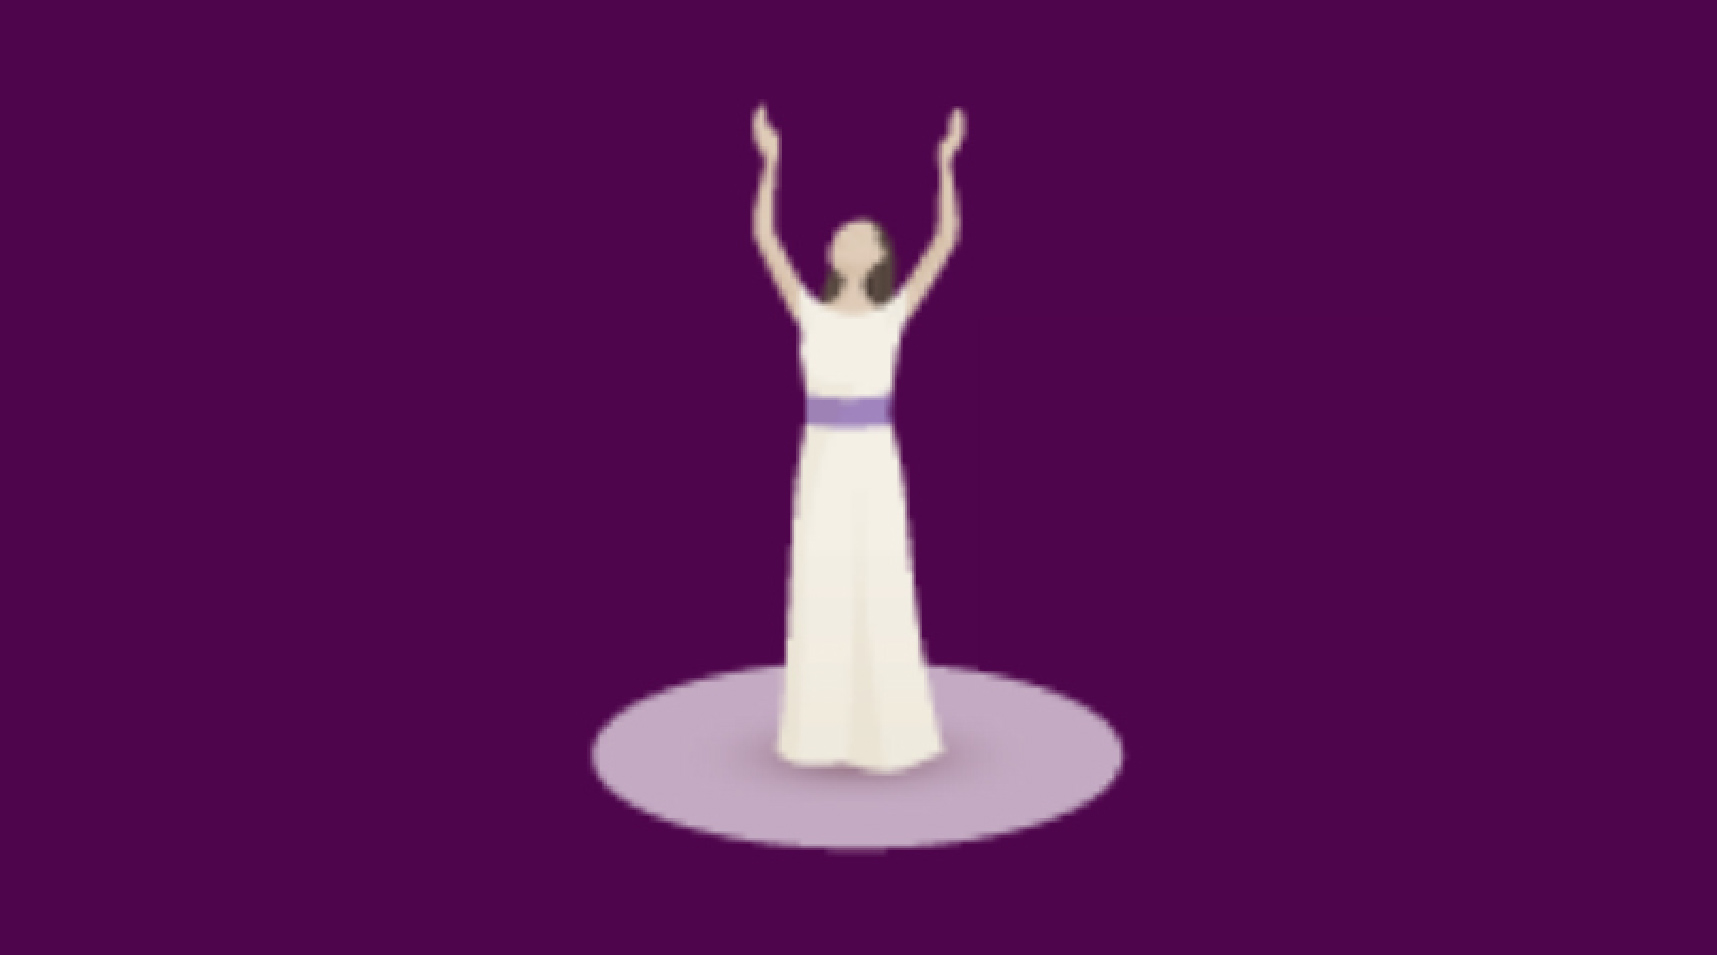 cartoon animation of a lady lifting her arms up in a purple background